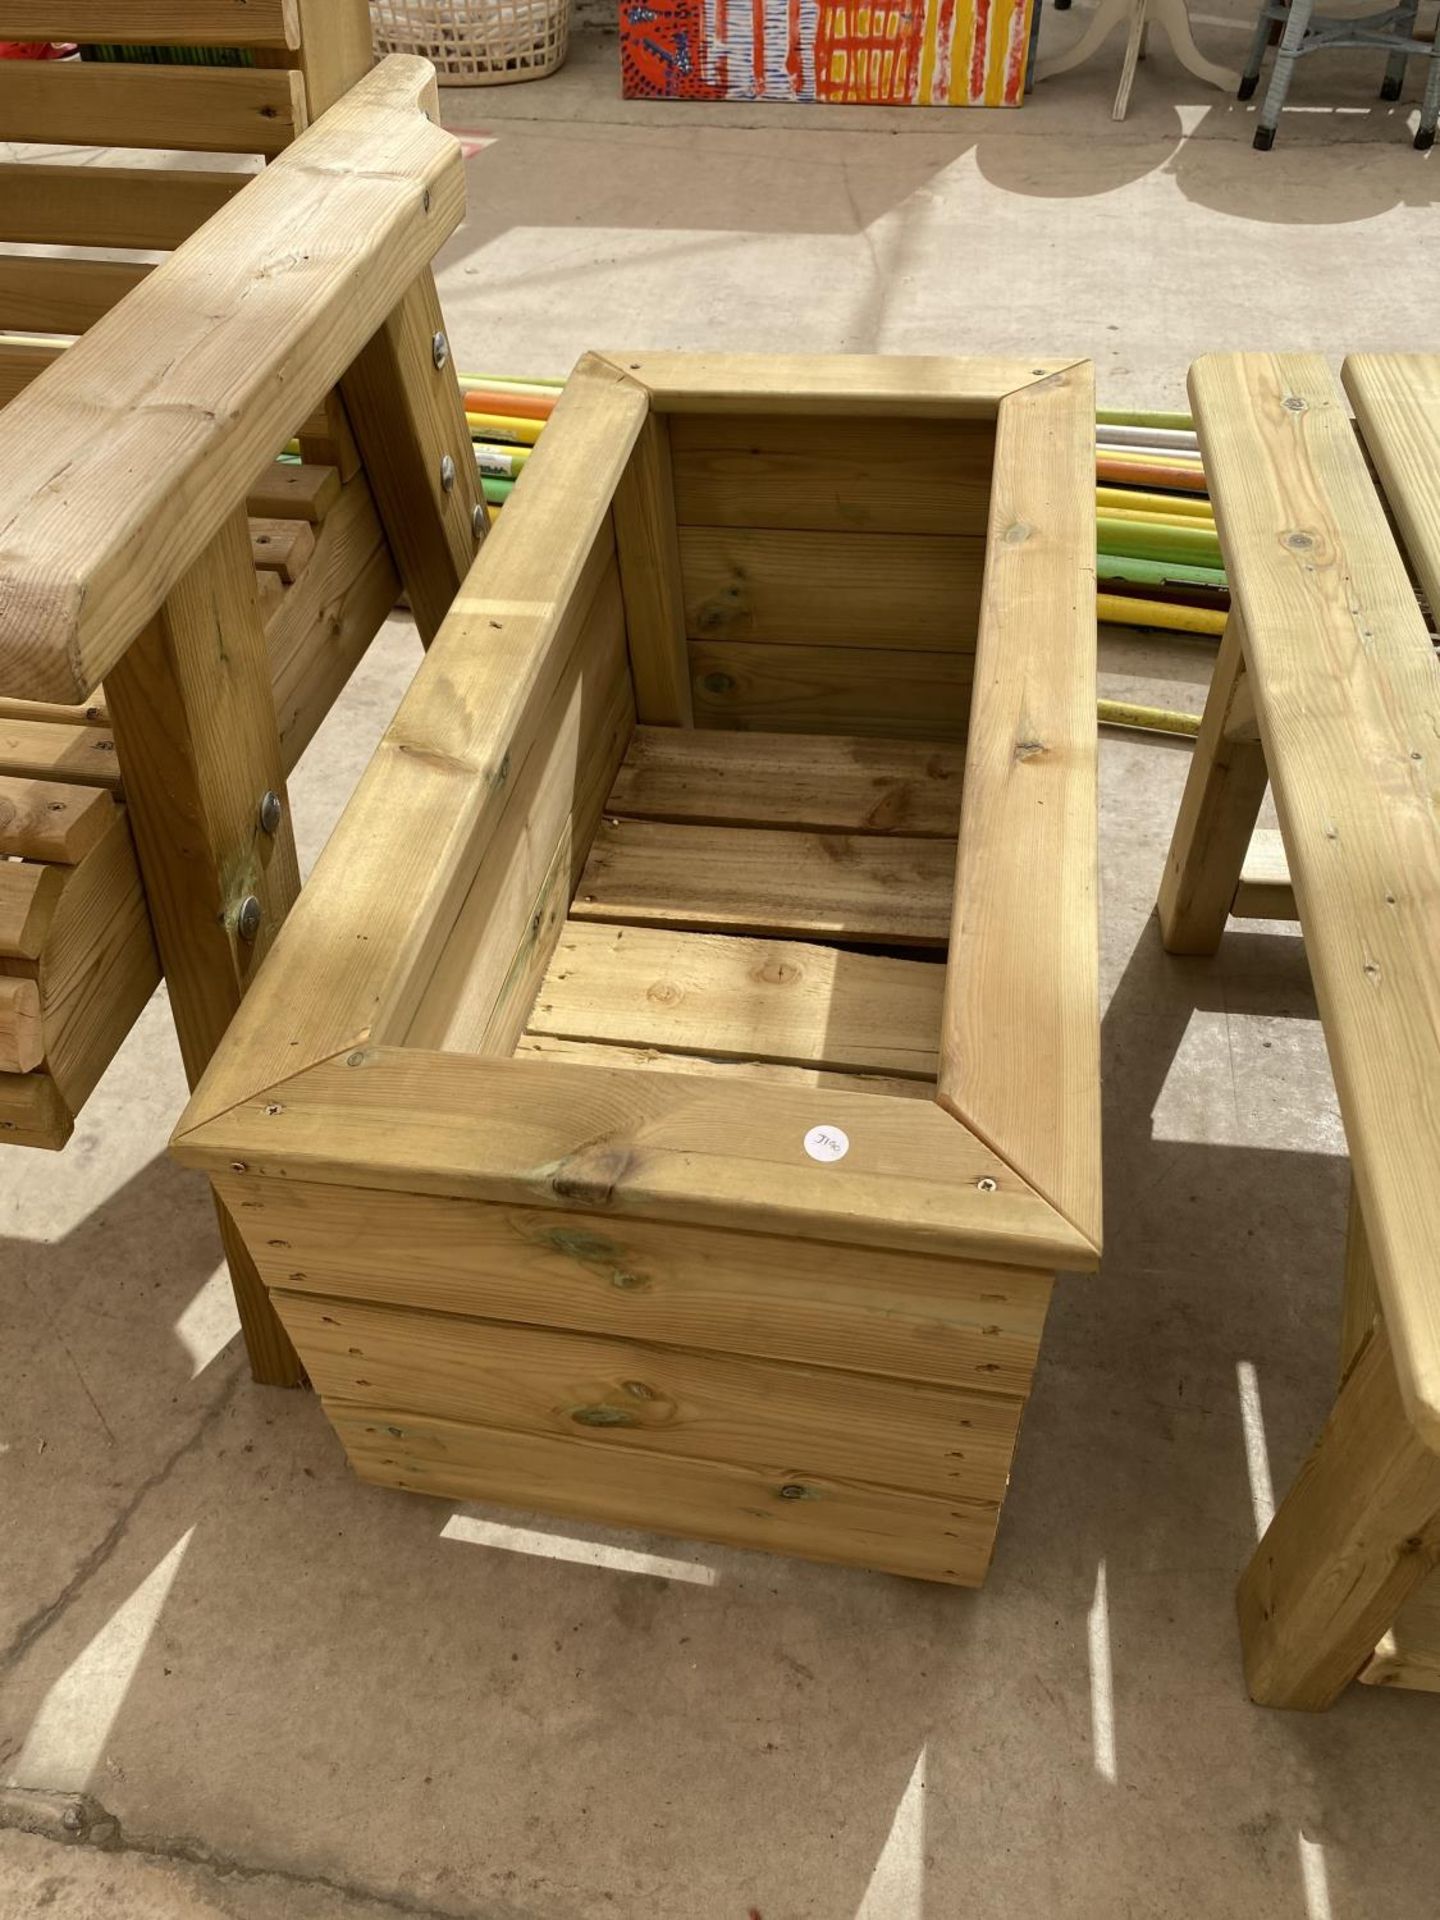 A WOODEN GARDEN FURNITURE SET TO INCLUDE A TWO SEATER BENCH, A CHAIR, A PLANTER AND A SIDE TABLE - Image 3 of 5